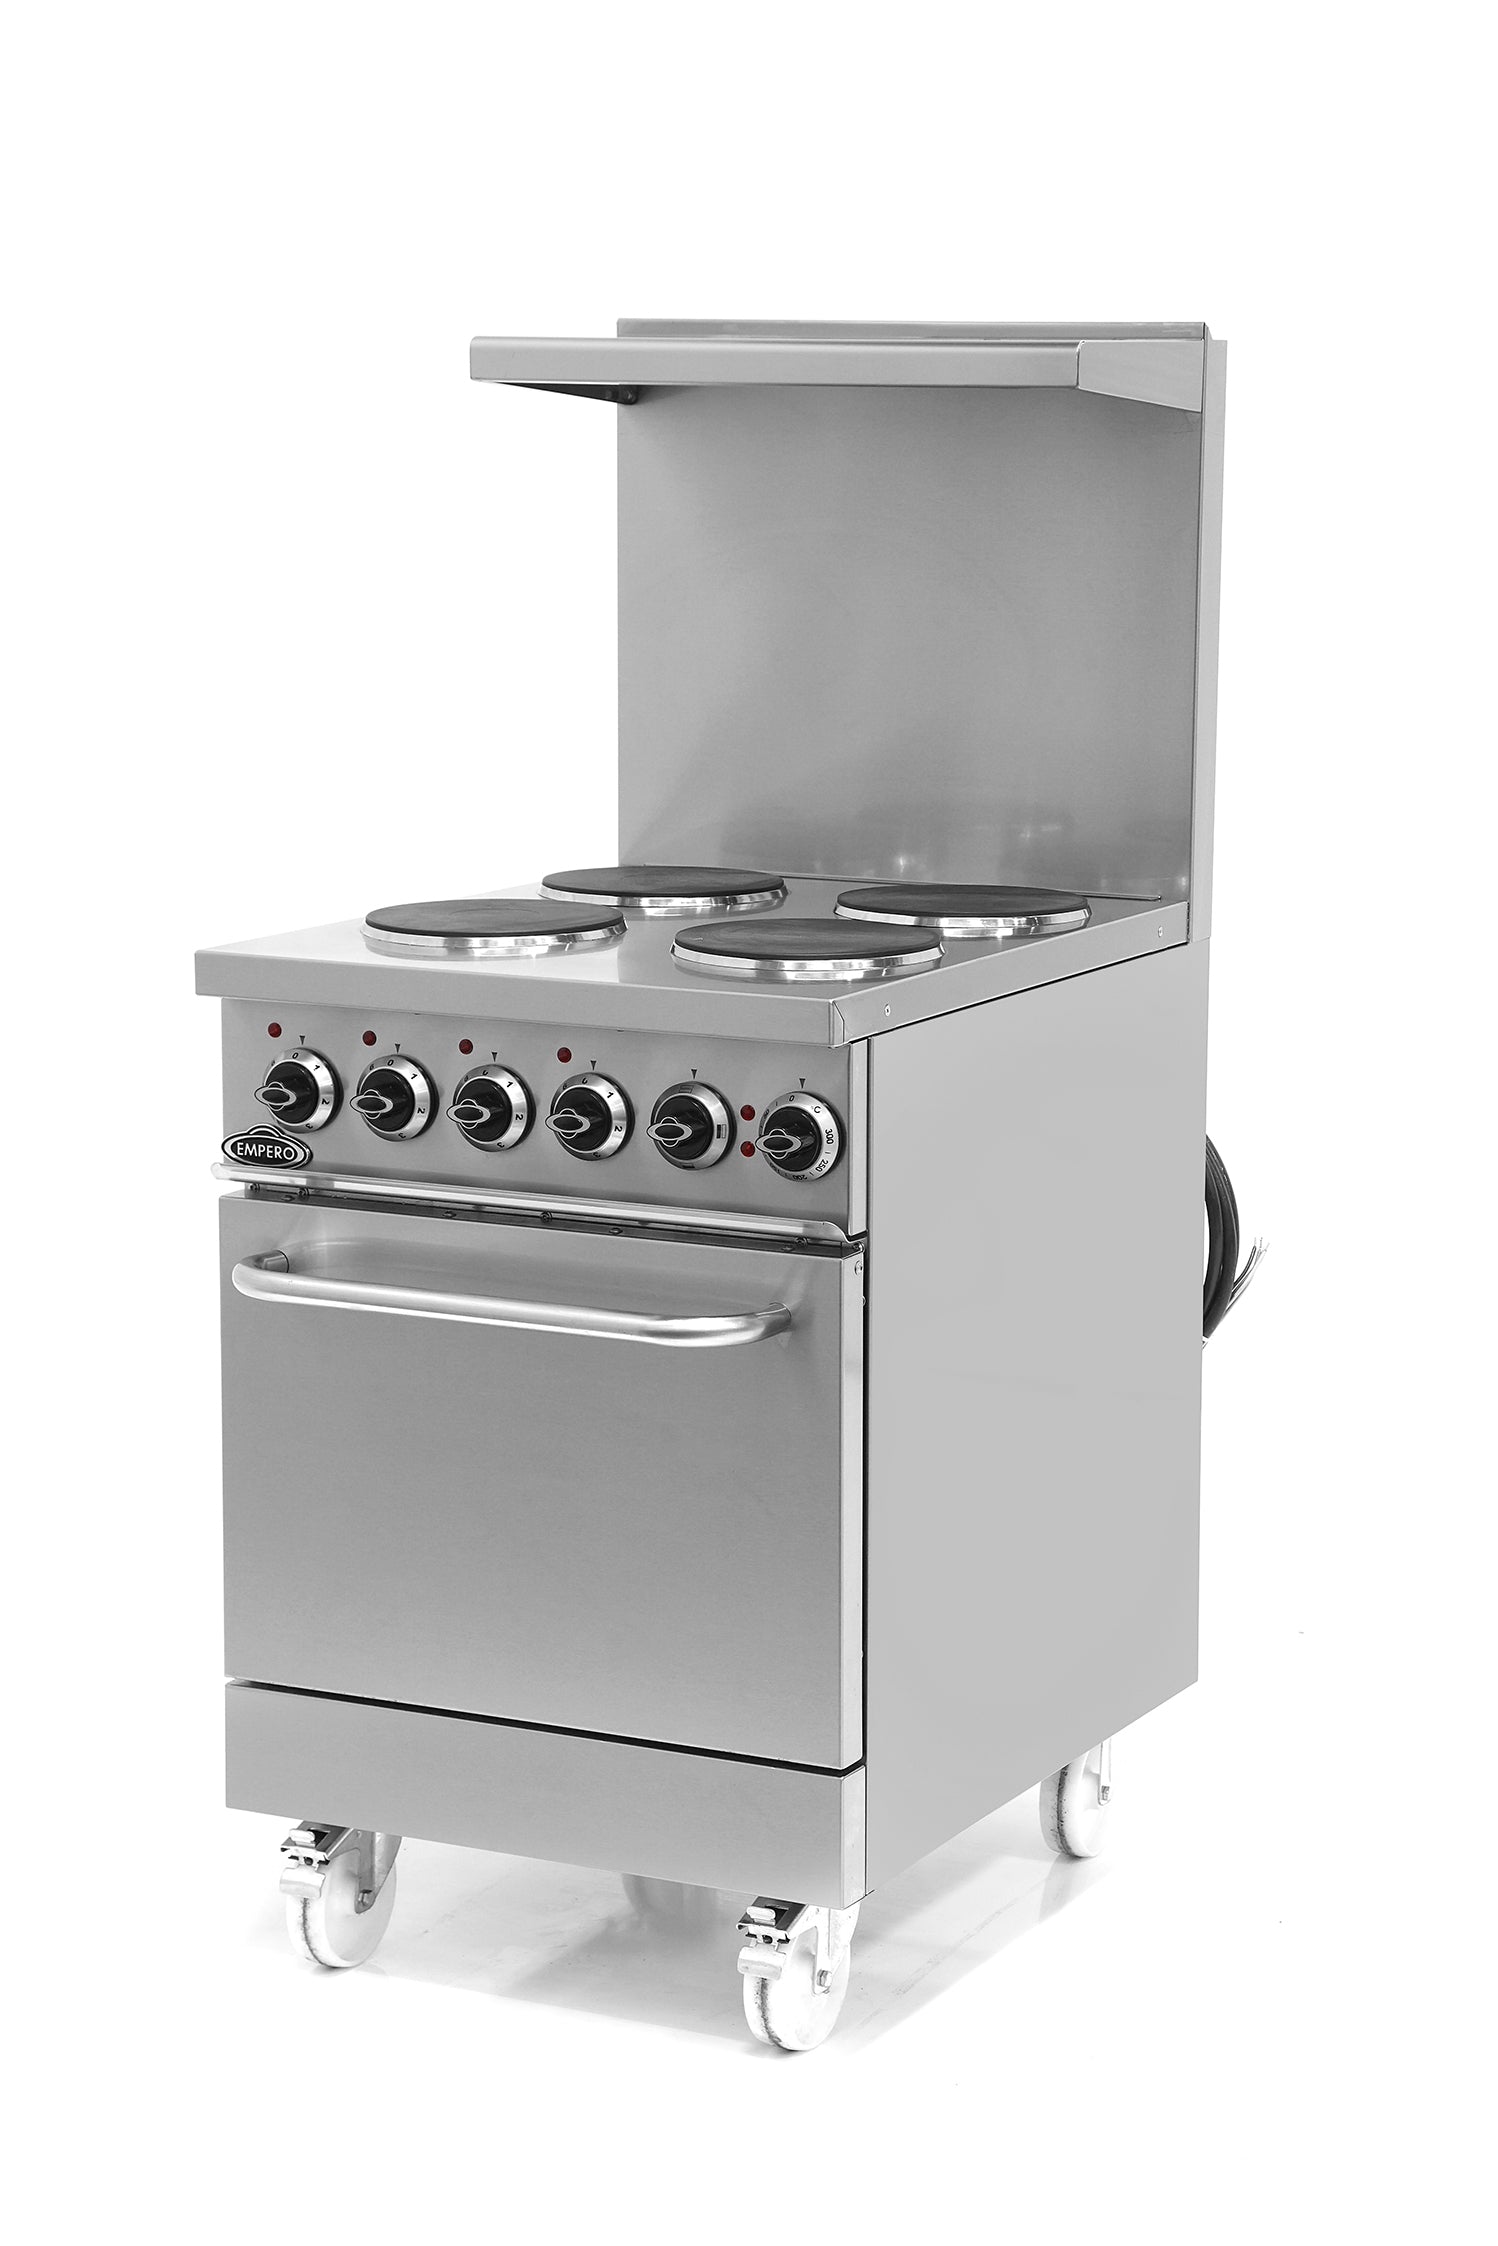 Pegasus R-24E 24″ Electric Range with 4 Round Plates and Standard Oven